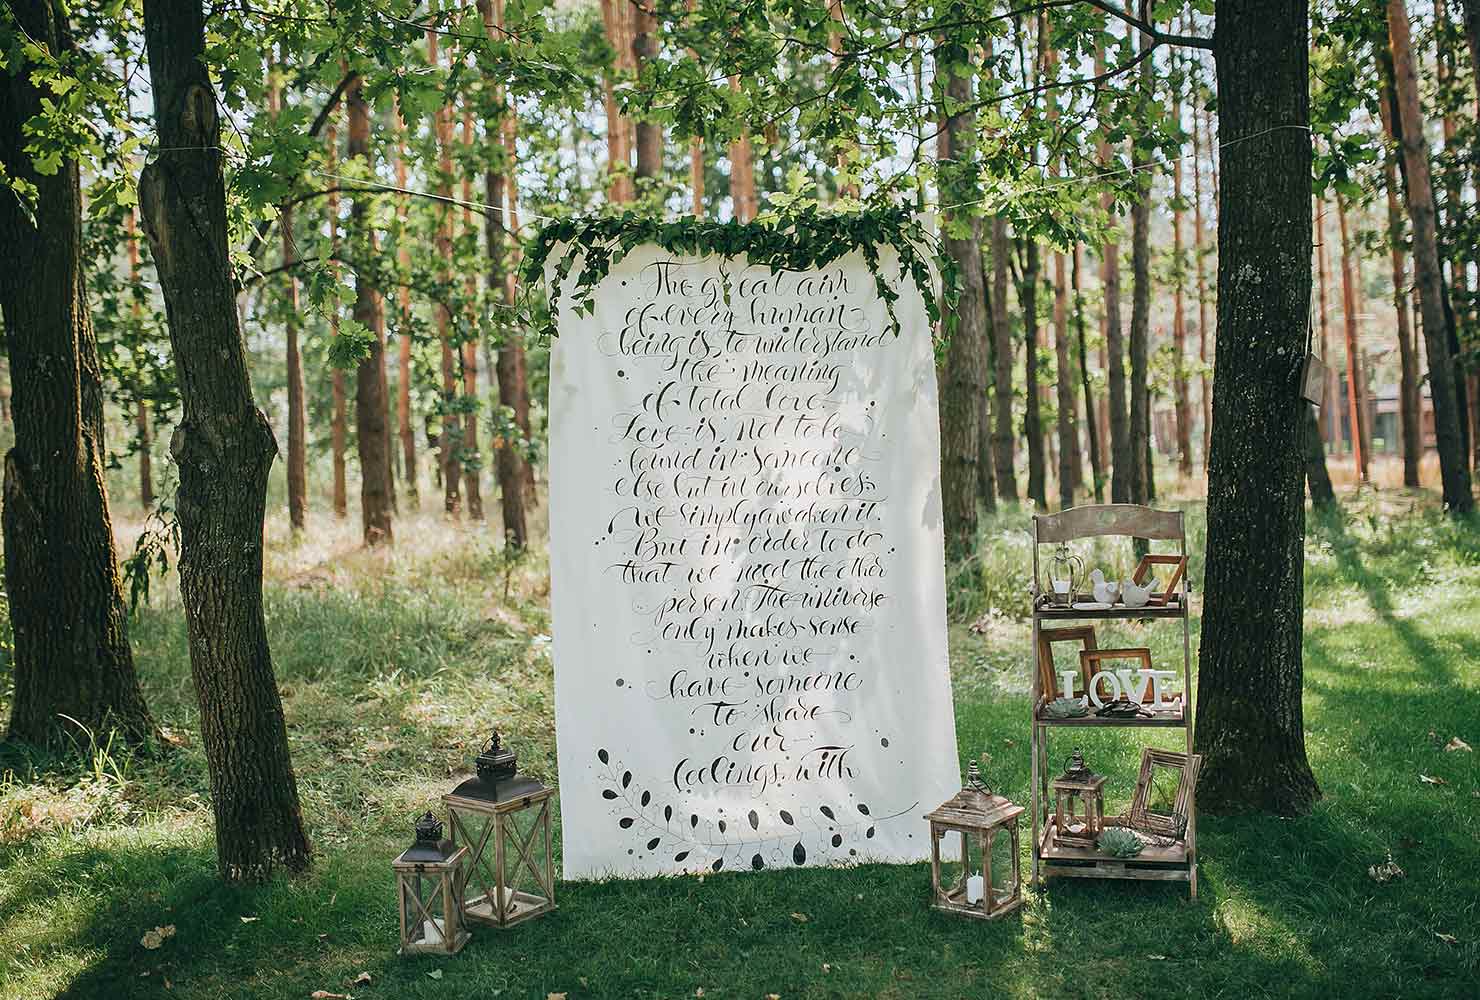 Paper scroll ceremony background in a forest.